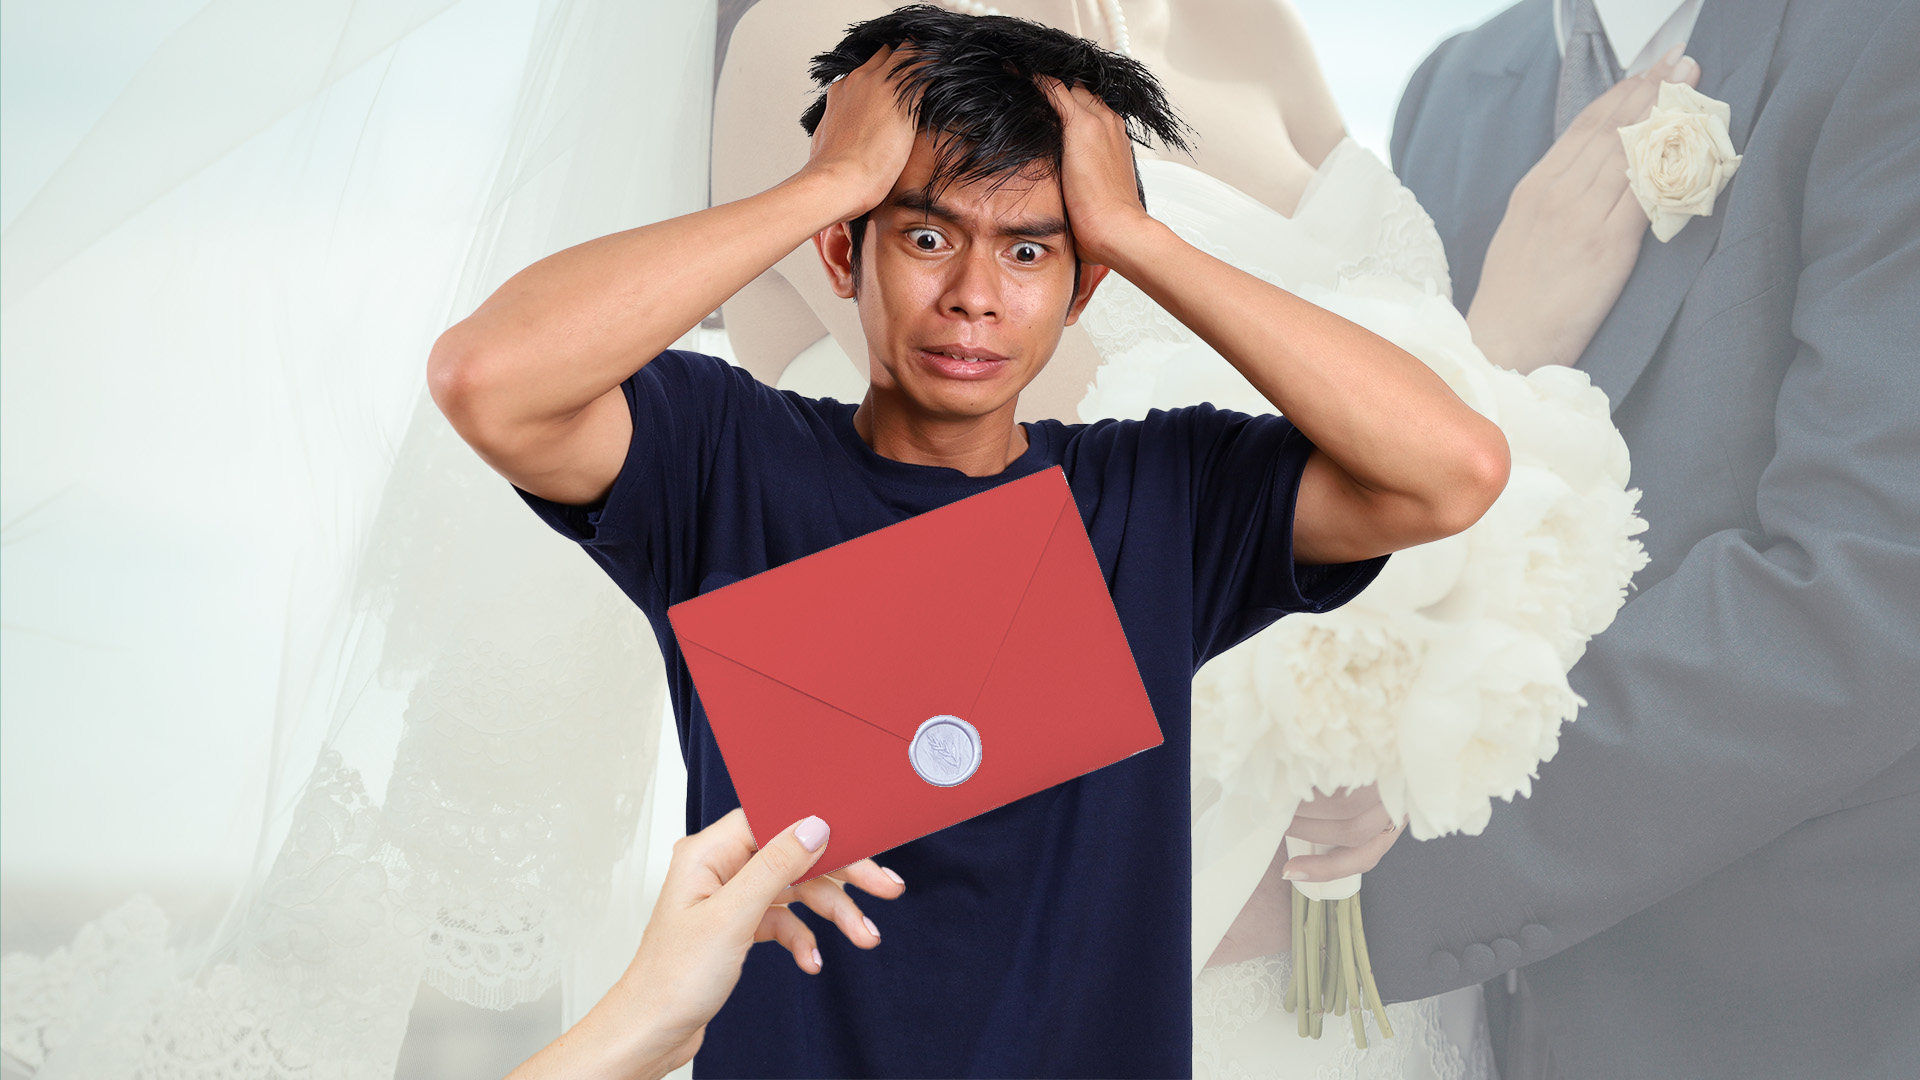 A surprise “red bomb” wedding invitation from a workmate prompted a Hong Kong man to seek online advice on whether to accept or decline it, sparking a flood of responses. Photo: SCMP composite